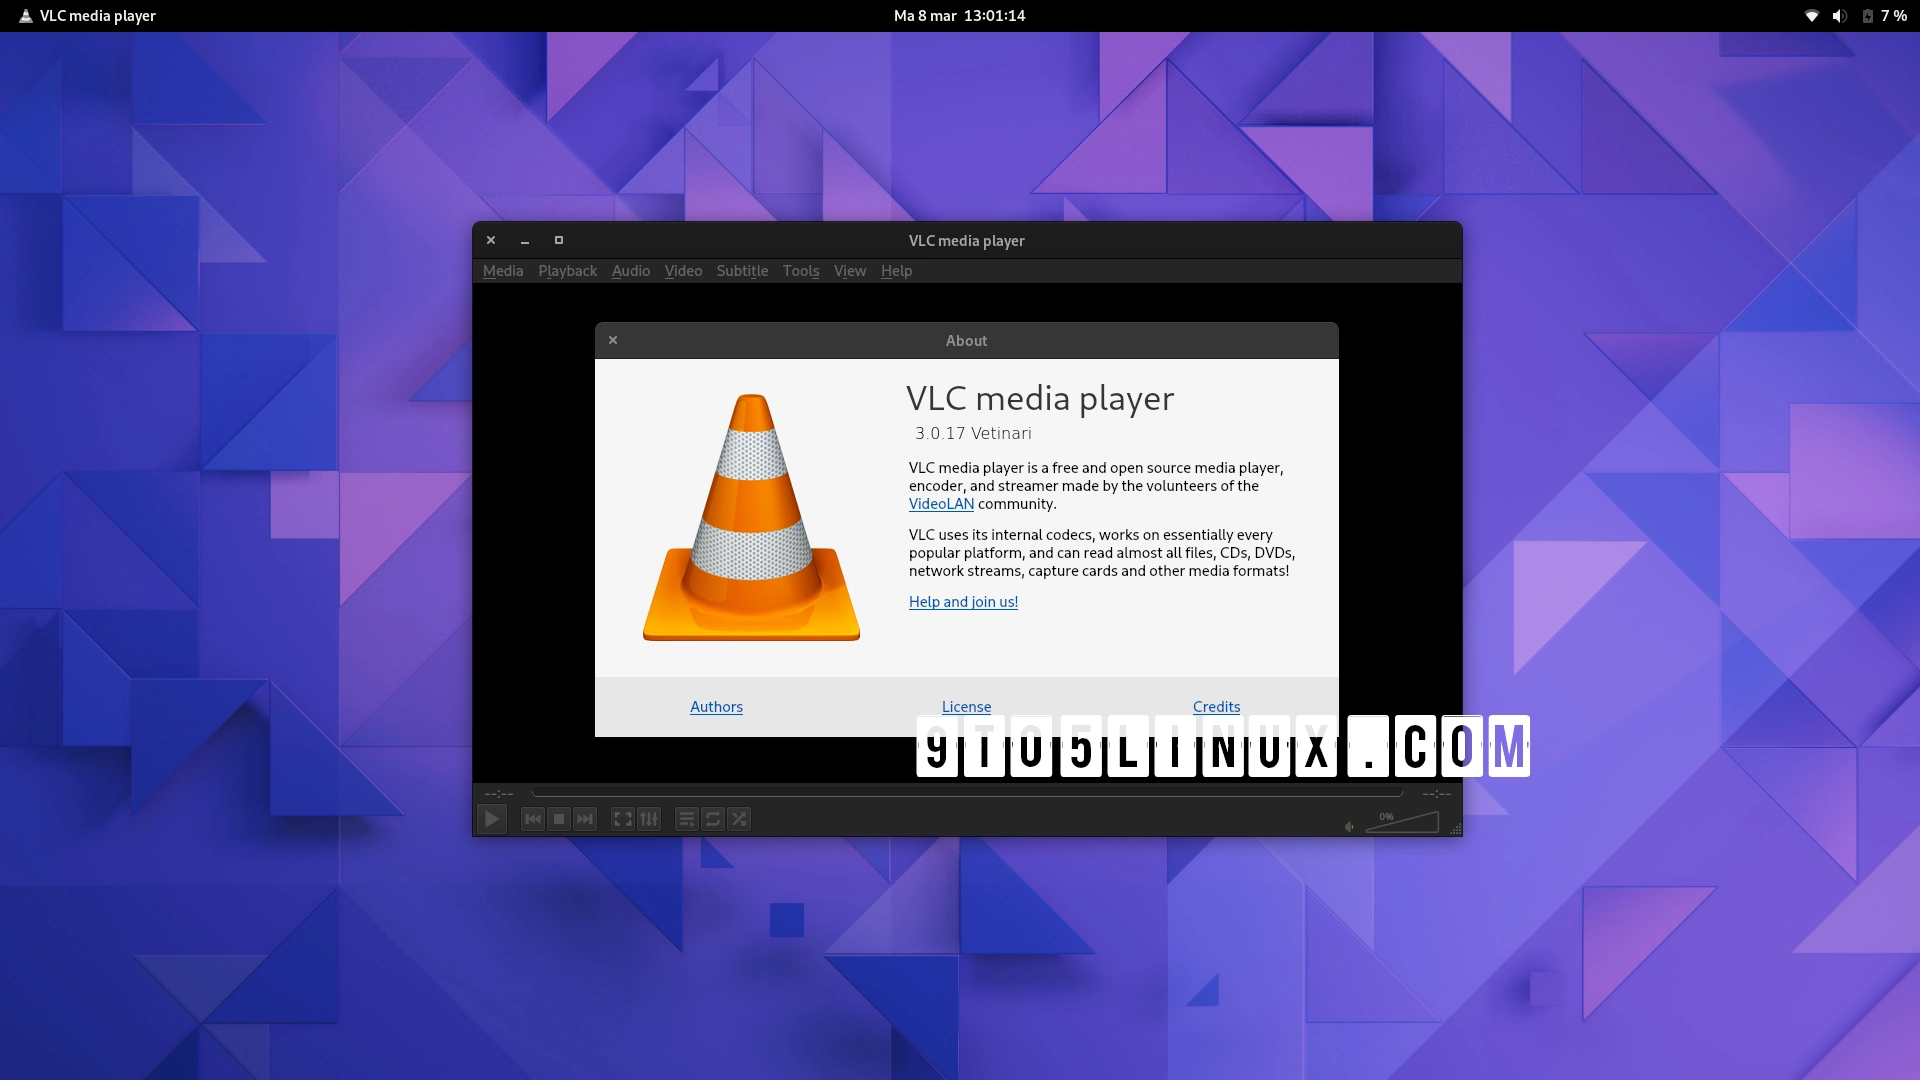 VLC 3.0.17 Improves HW Decoding for AMD GPUs, Adds Support for DTS LBR and DAV Files